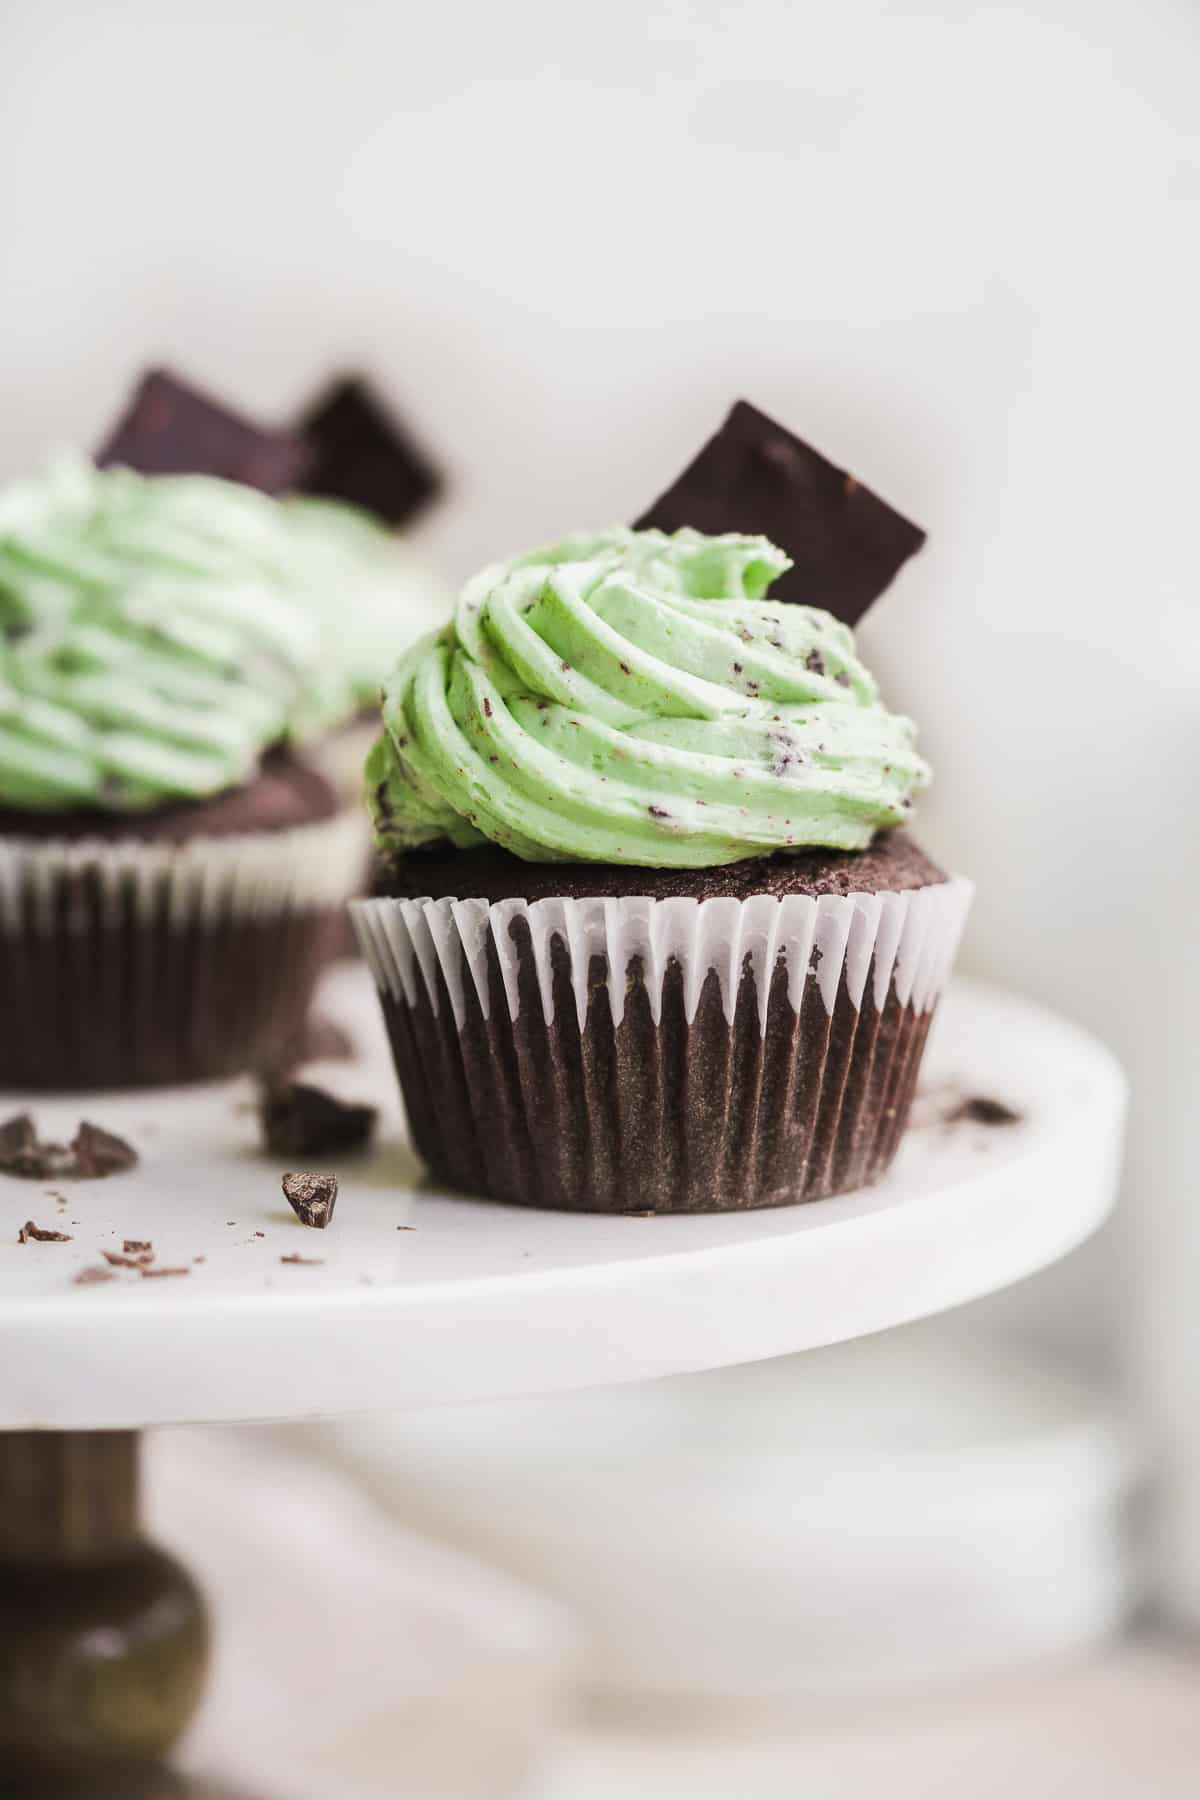 Chocolate cupcake with mint green icing on a white marble cake stand with chocolate on the surface.